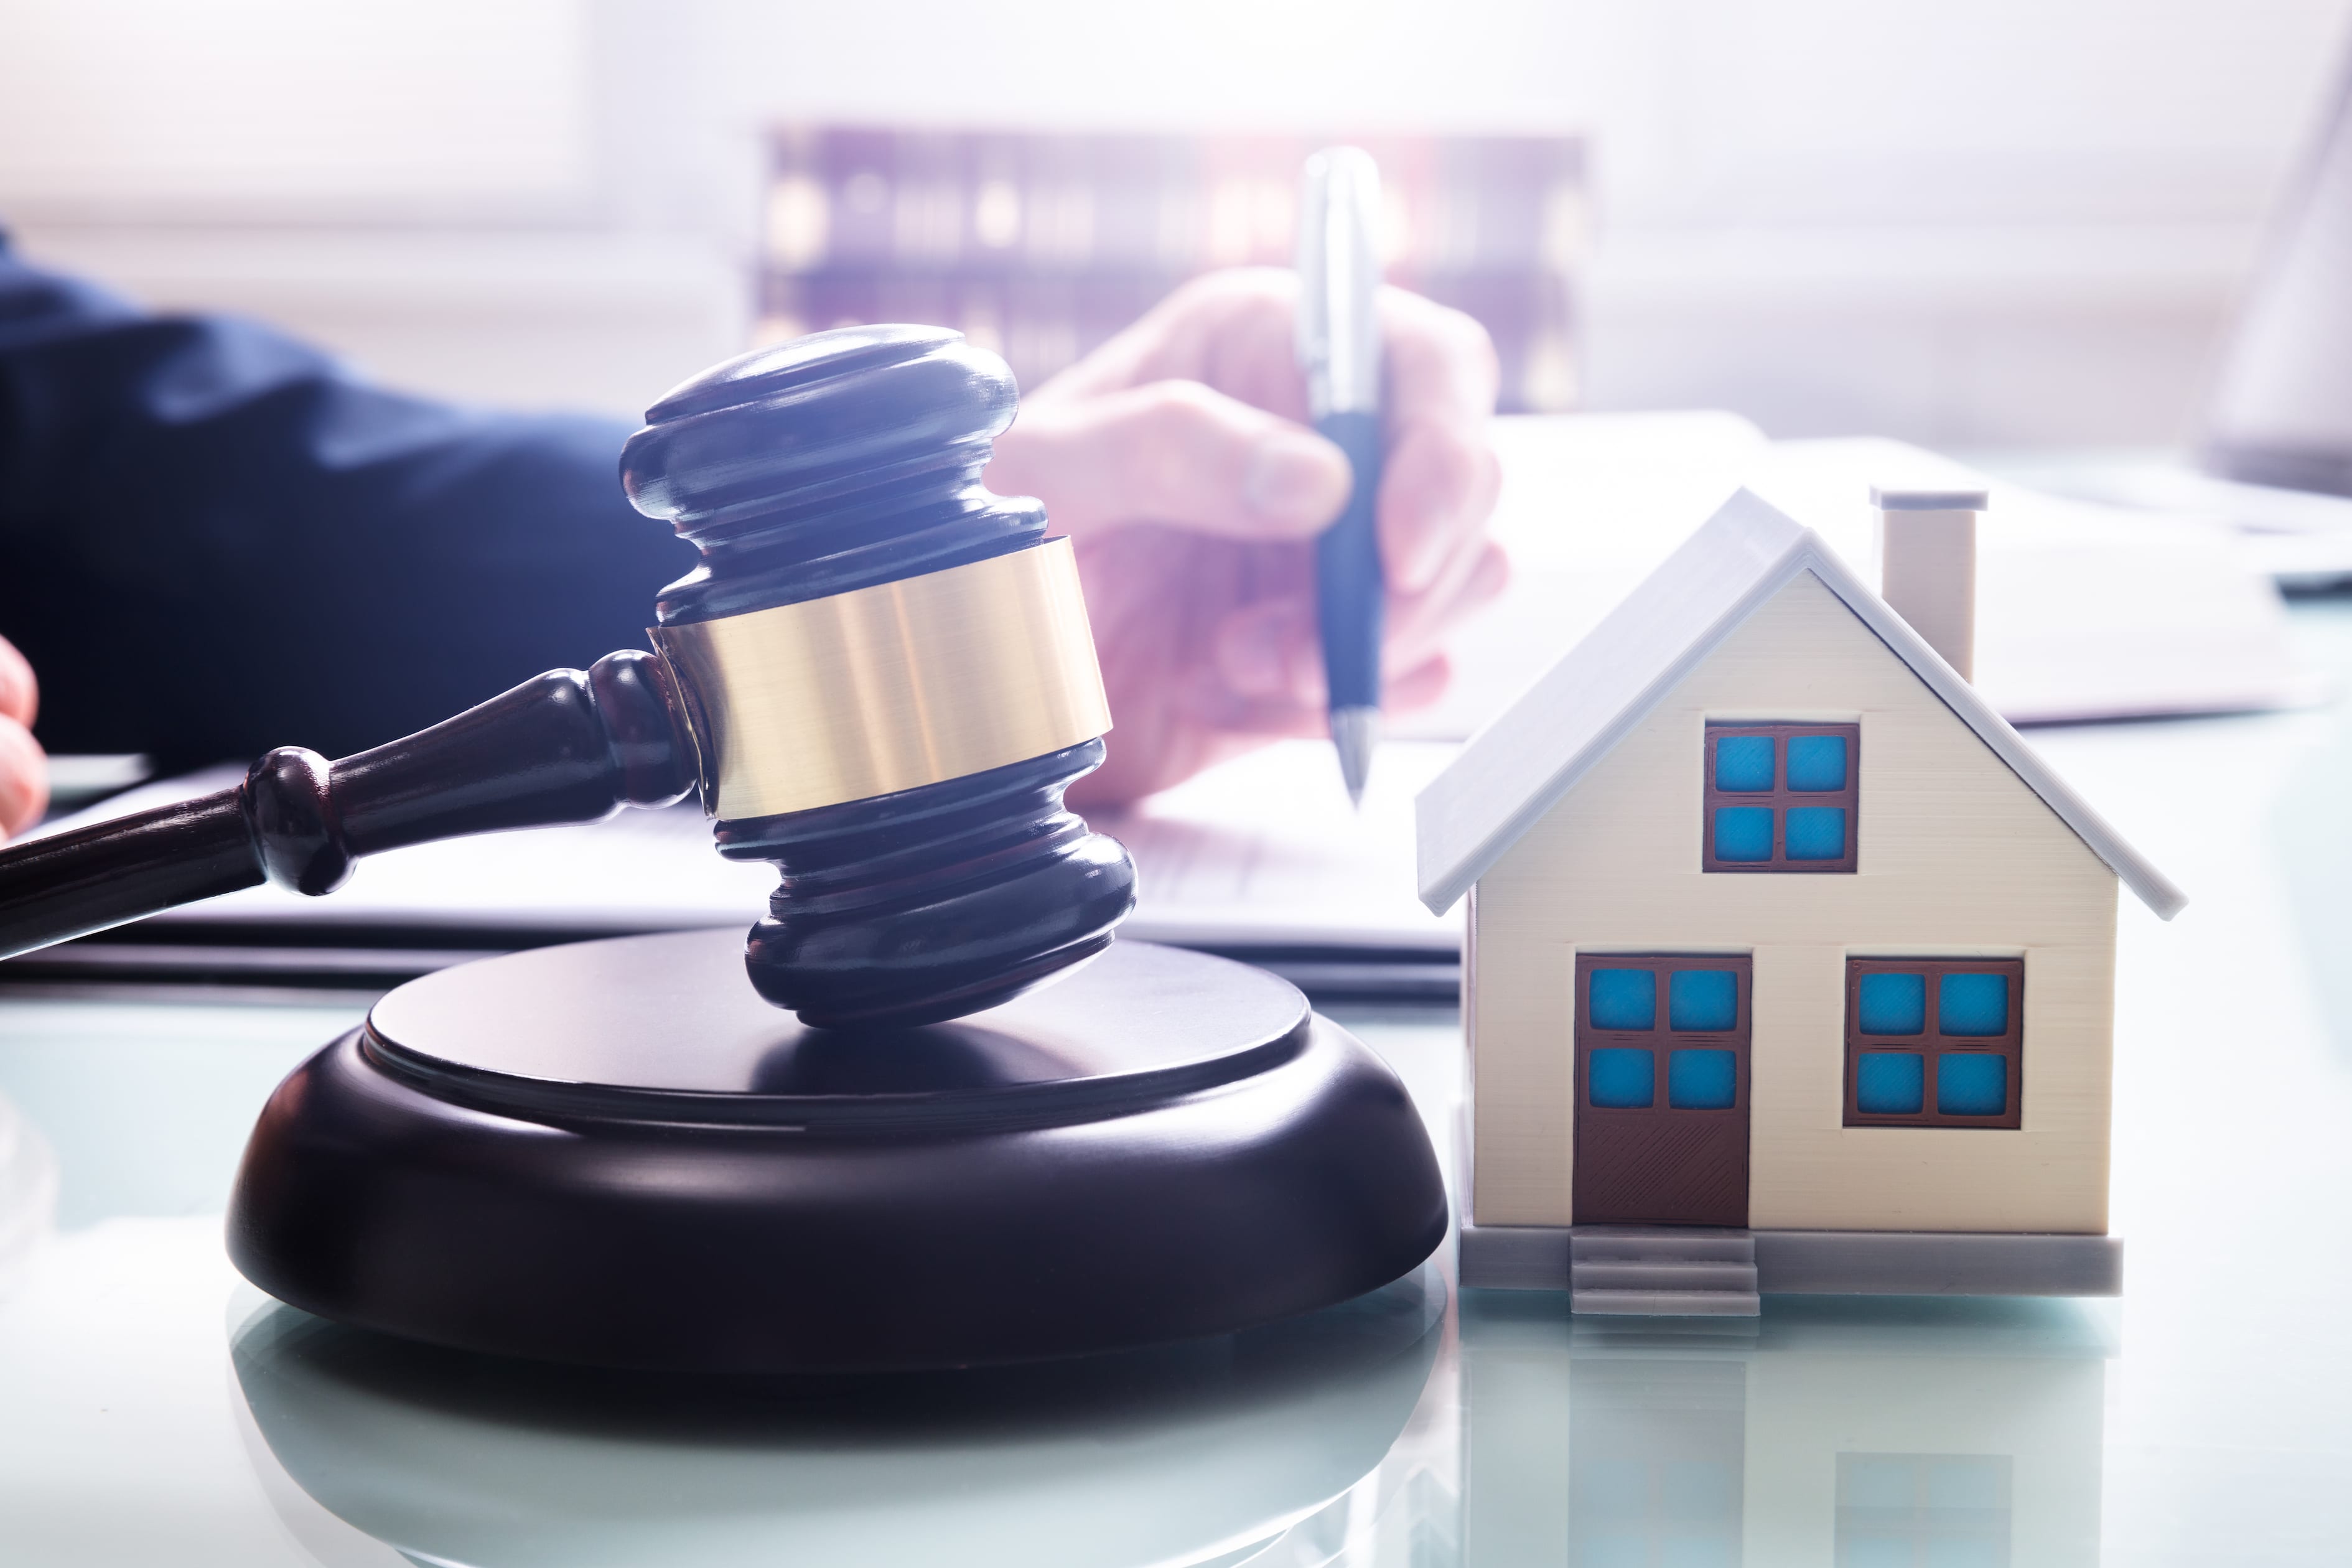 Should I resolve my property matter during COVID-19?